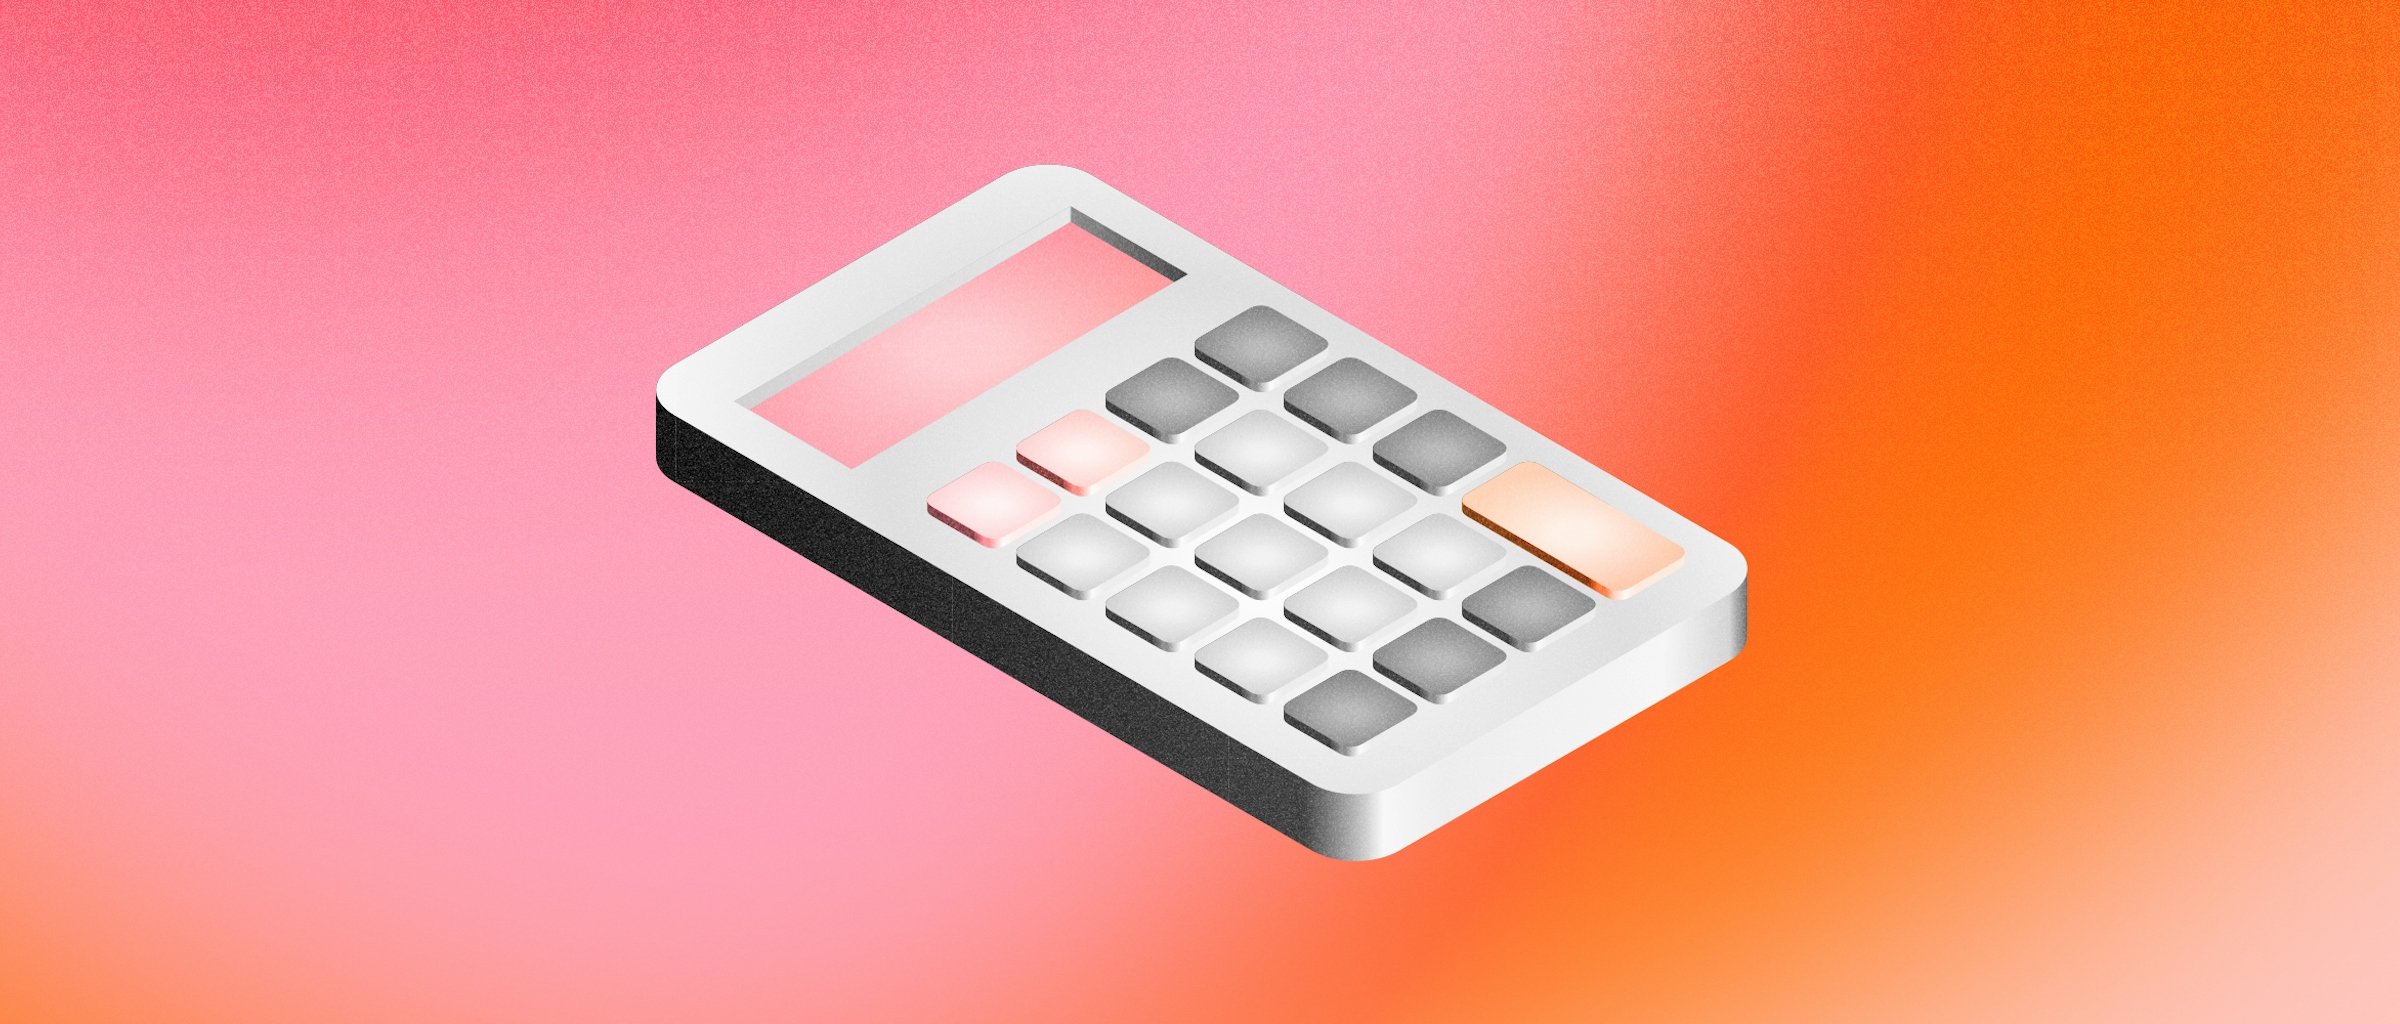 Cover image featuring a calculator on top of a coral background.